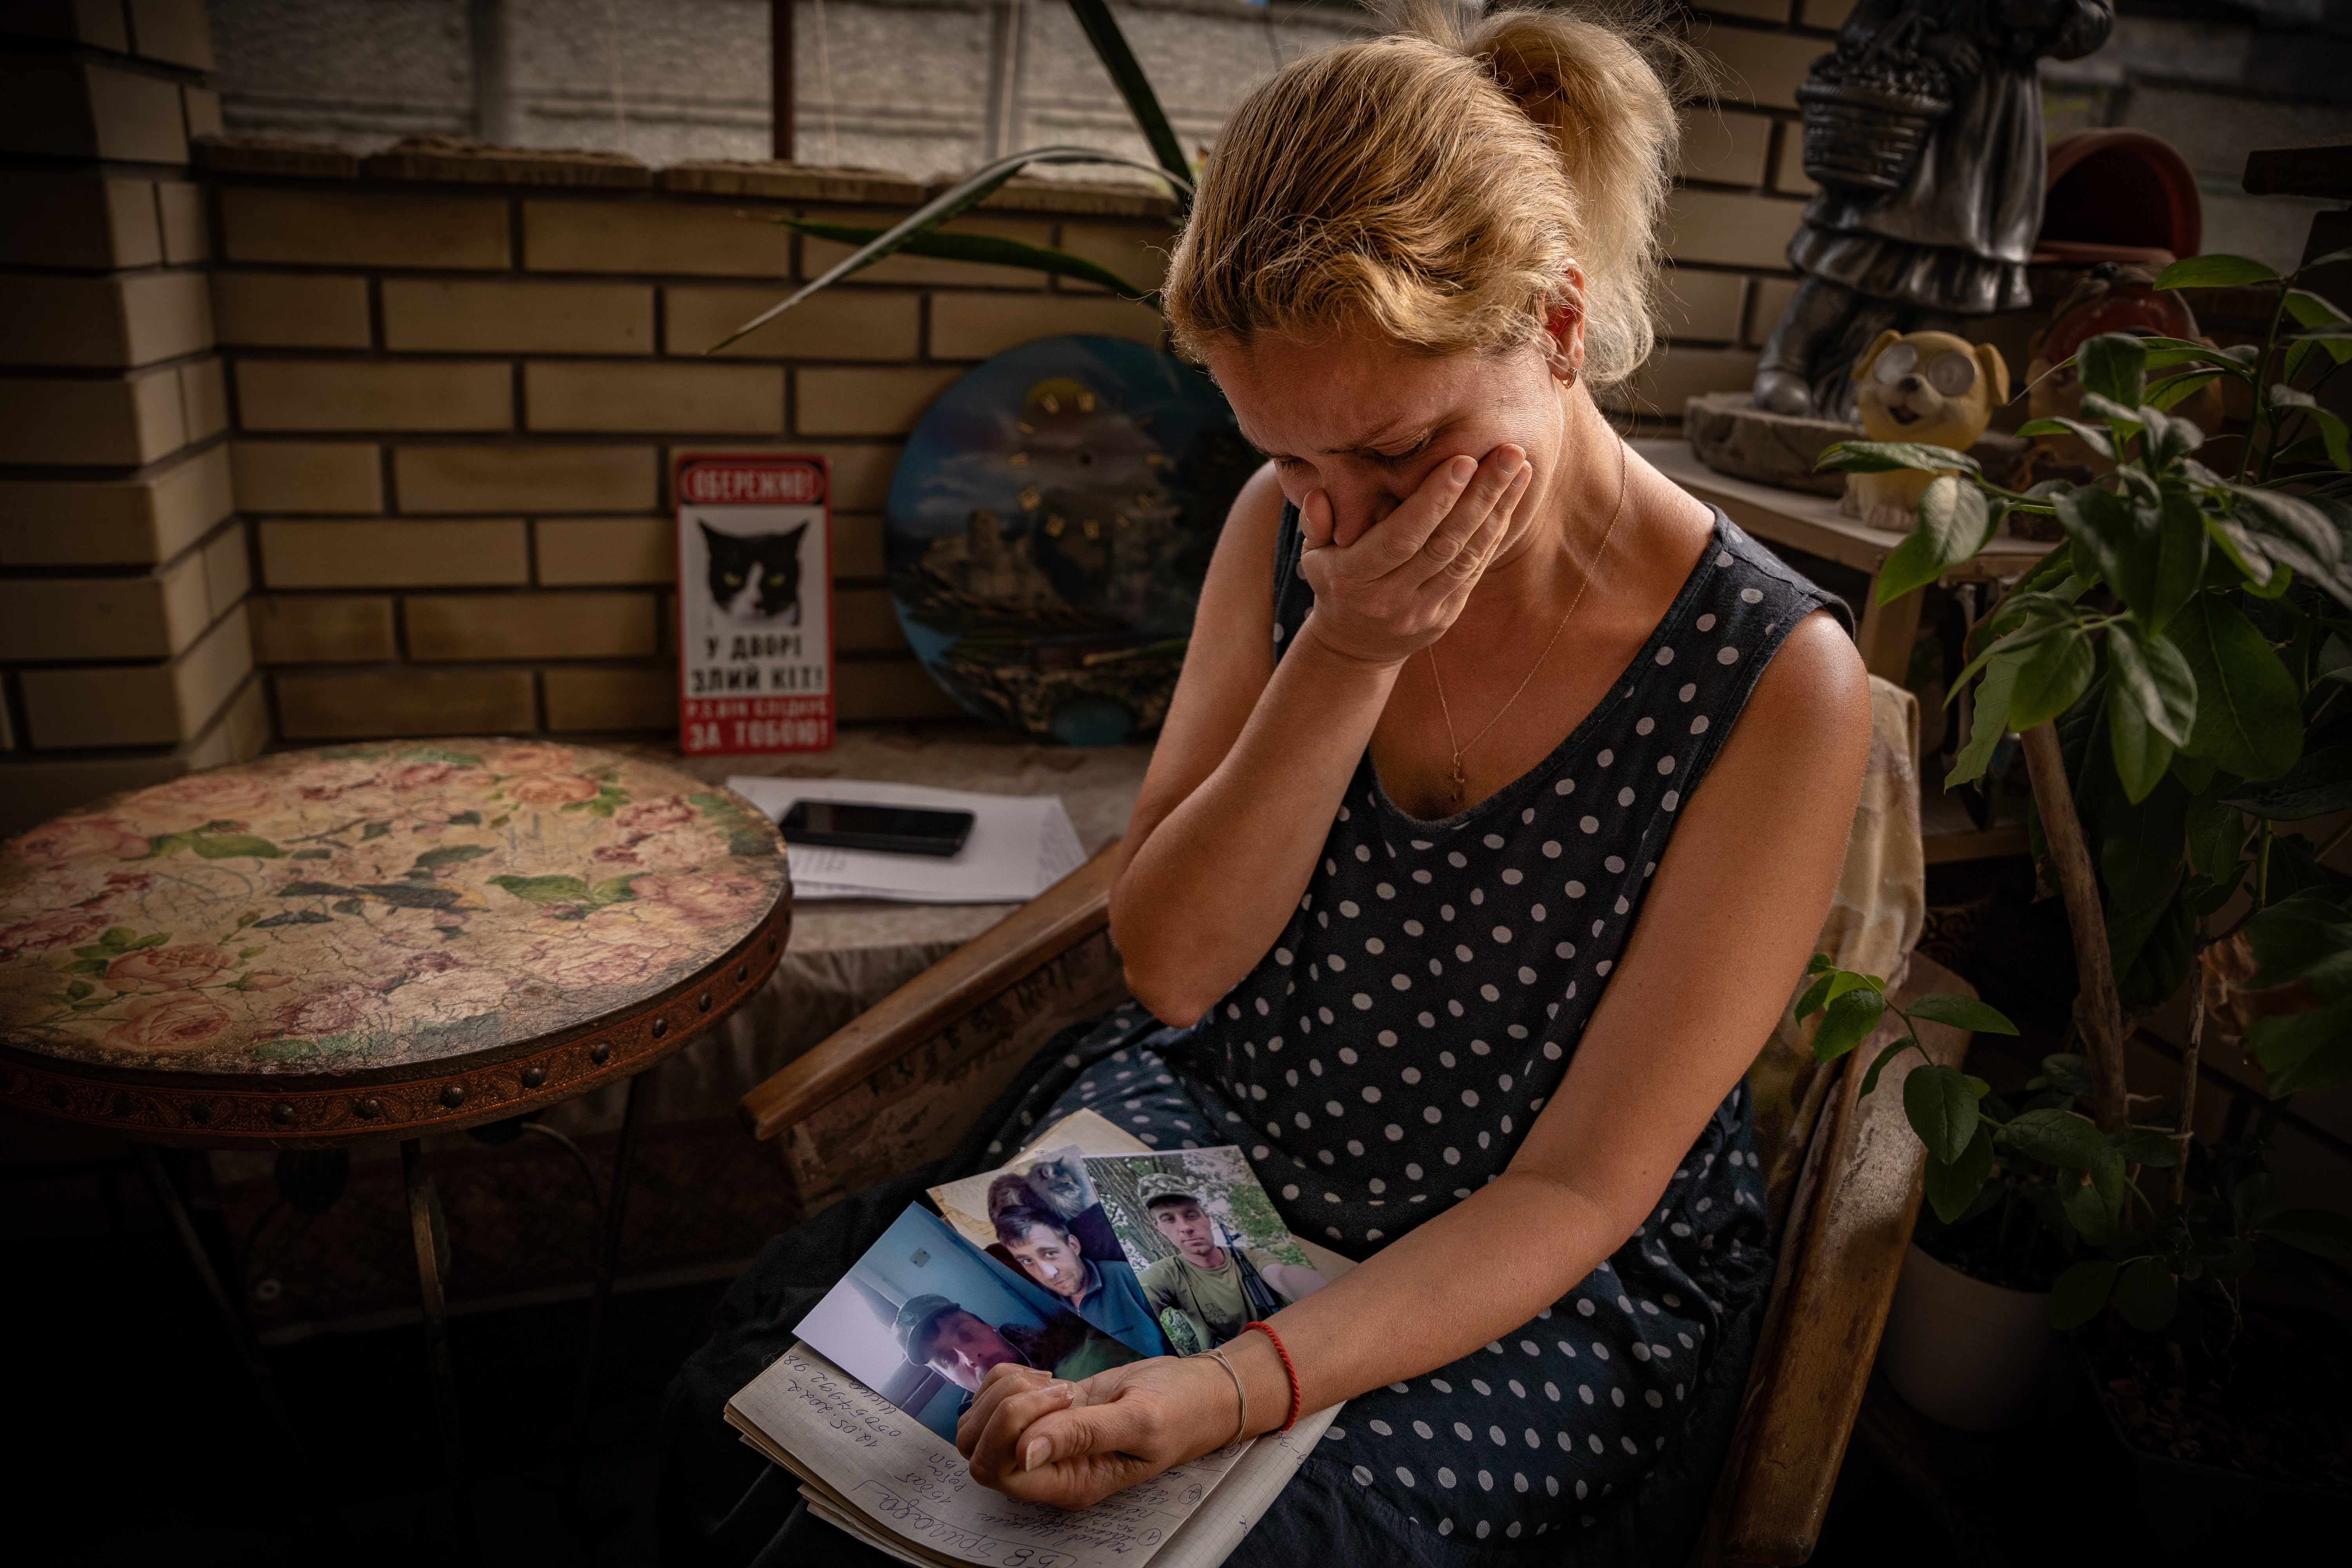 Maria, a manicurist, weeps over the photos of her missing fiancé, who disappeared in battle